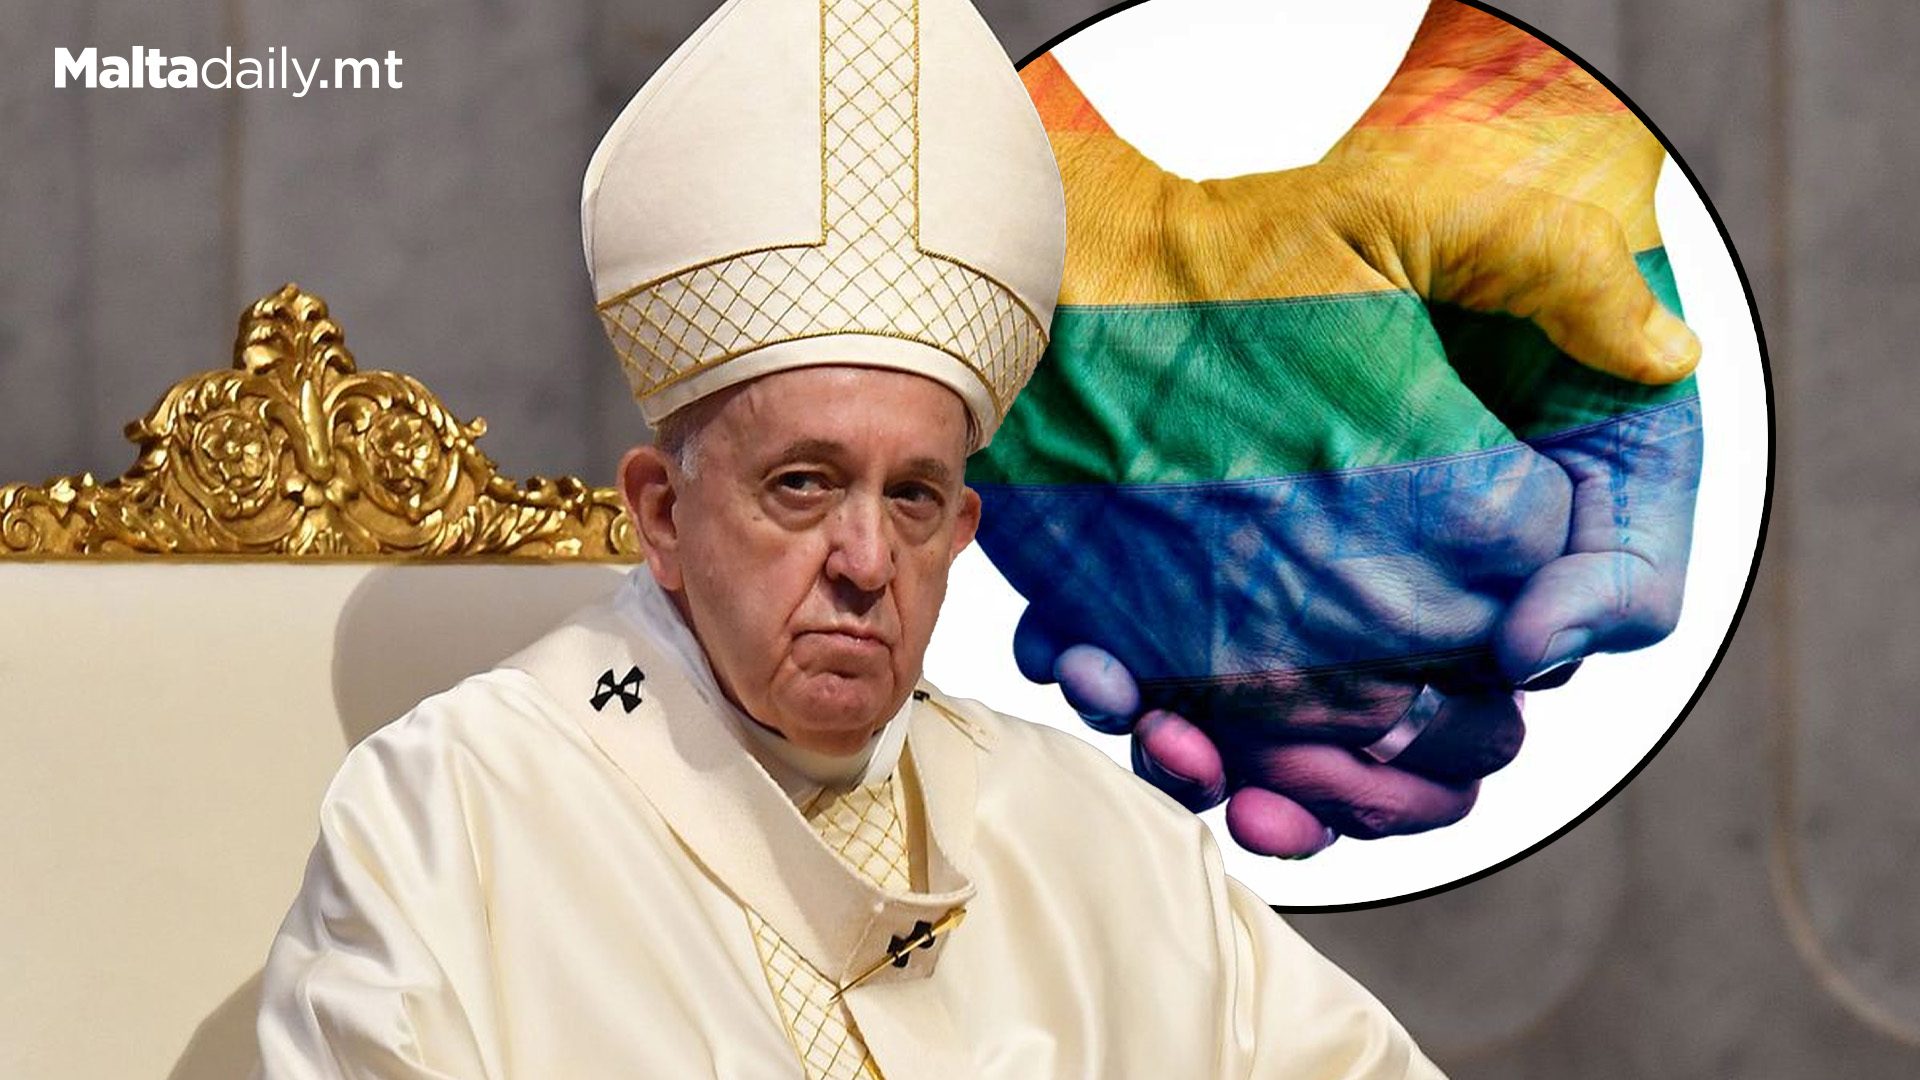 Pope Sorry For 'Too Much "Faggotness"' Slur